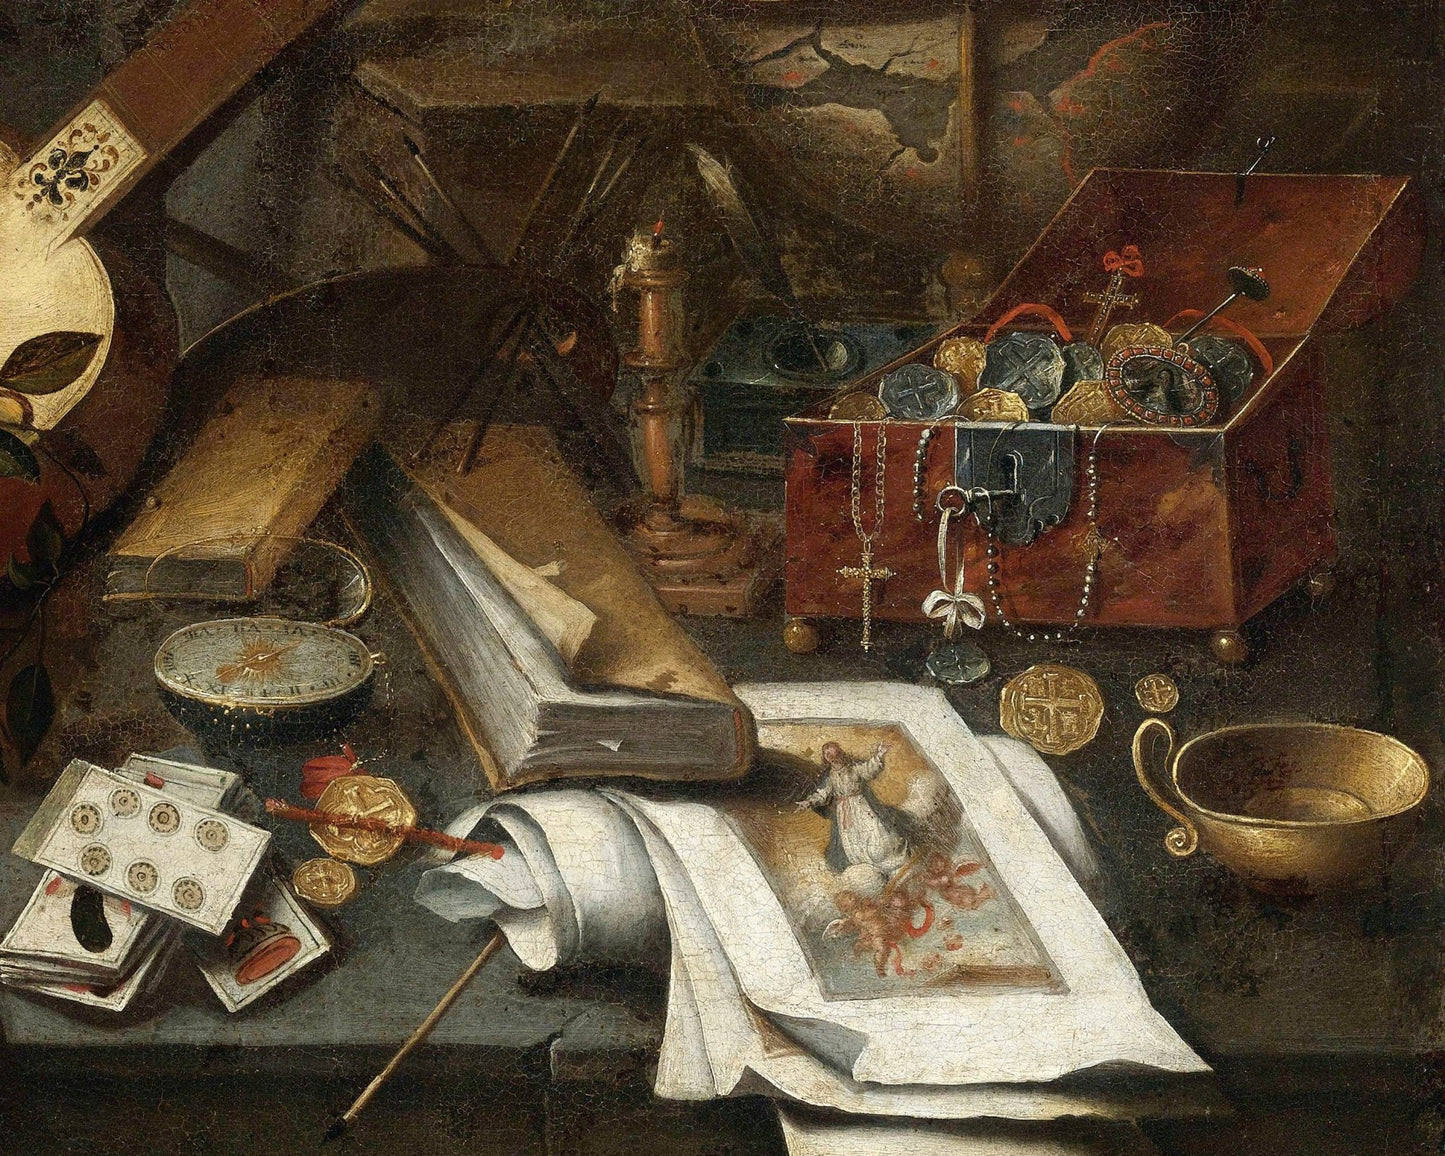 Tomás Hiepes "Still - life with a Guitar" (c.1650) - Mabon Gallery